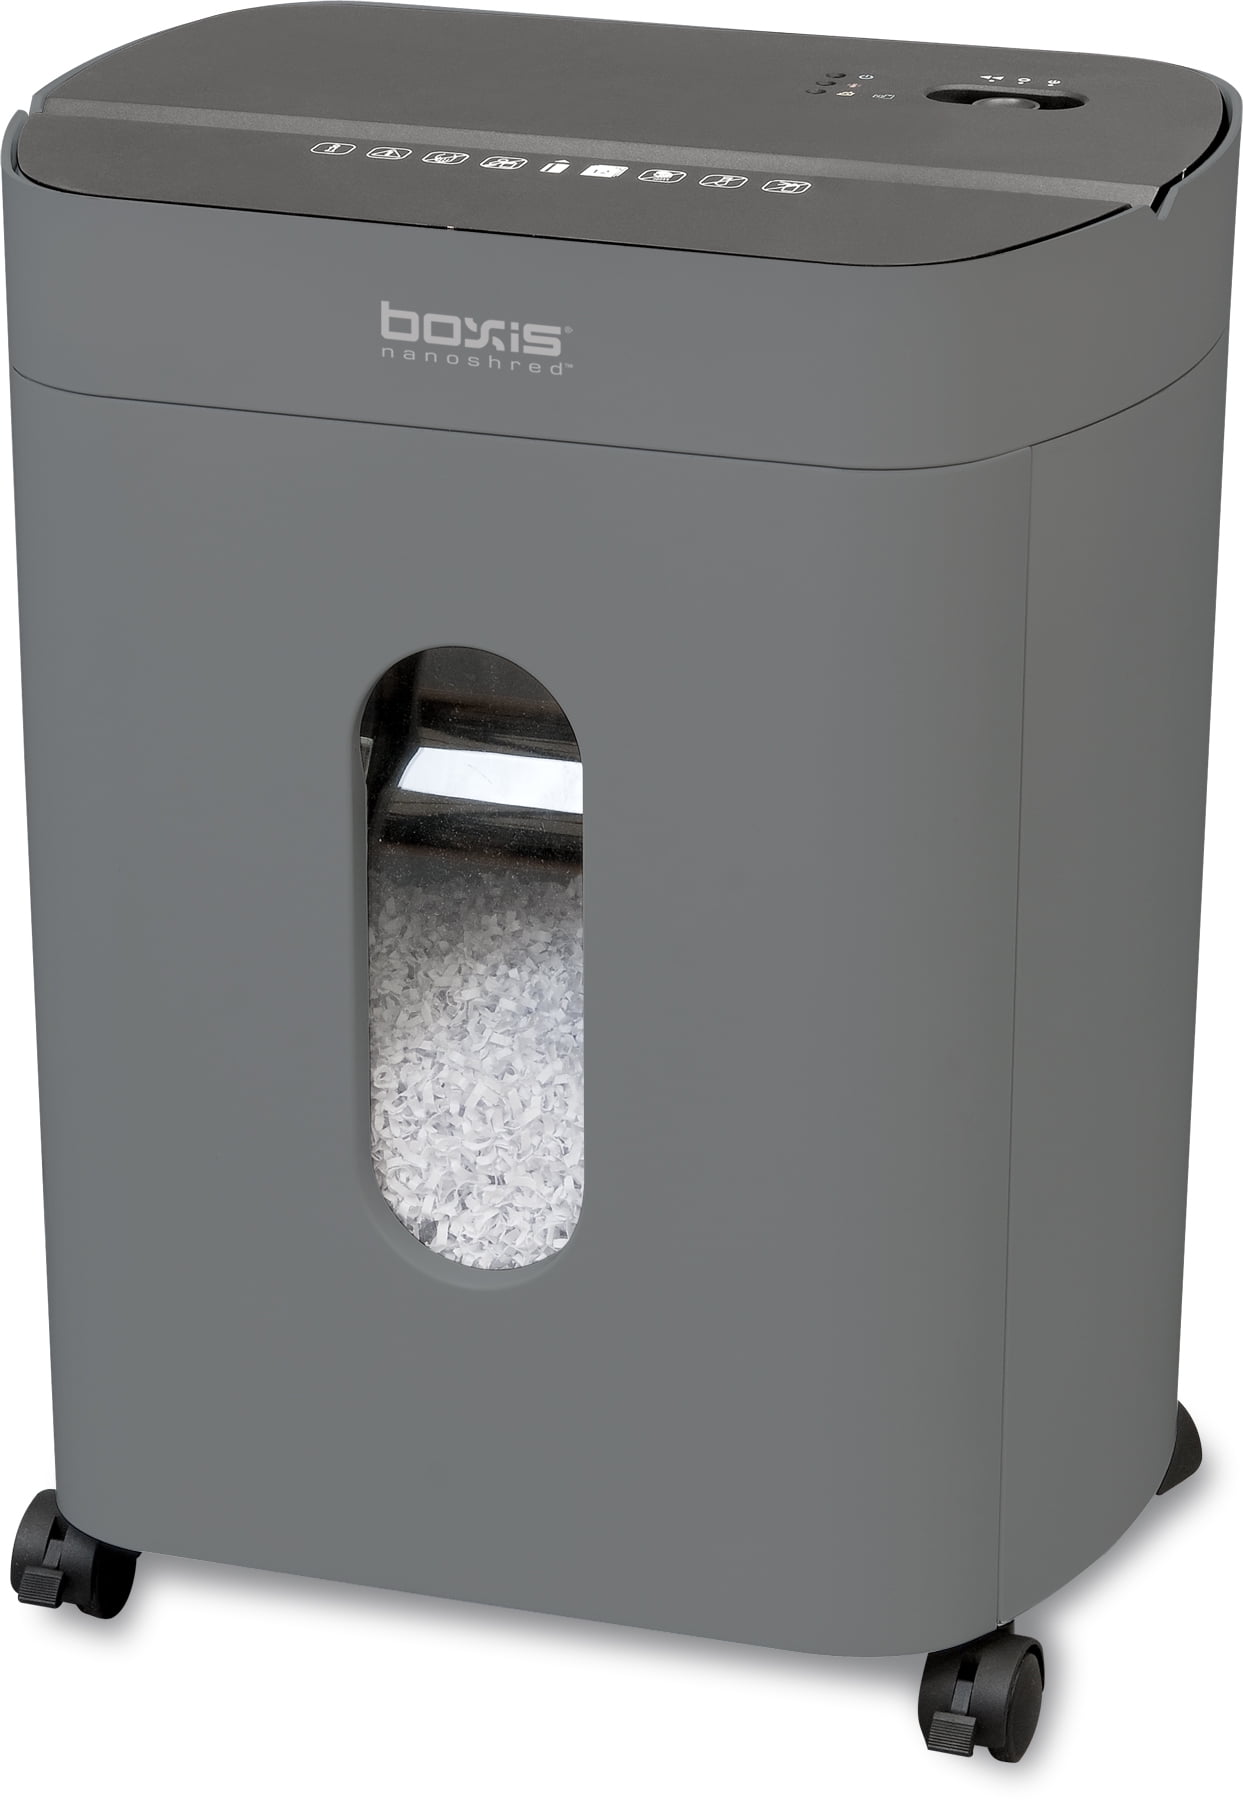 Picture of Boxis IS-BN101P-GUN-UBS Gun Metal Boxis NanoShred High Security 10-Sheet Paper Shredder Pullout Bin & Casters